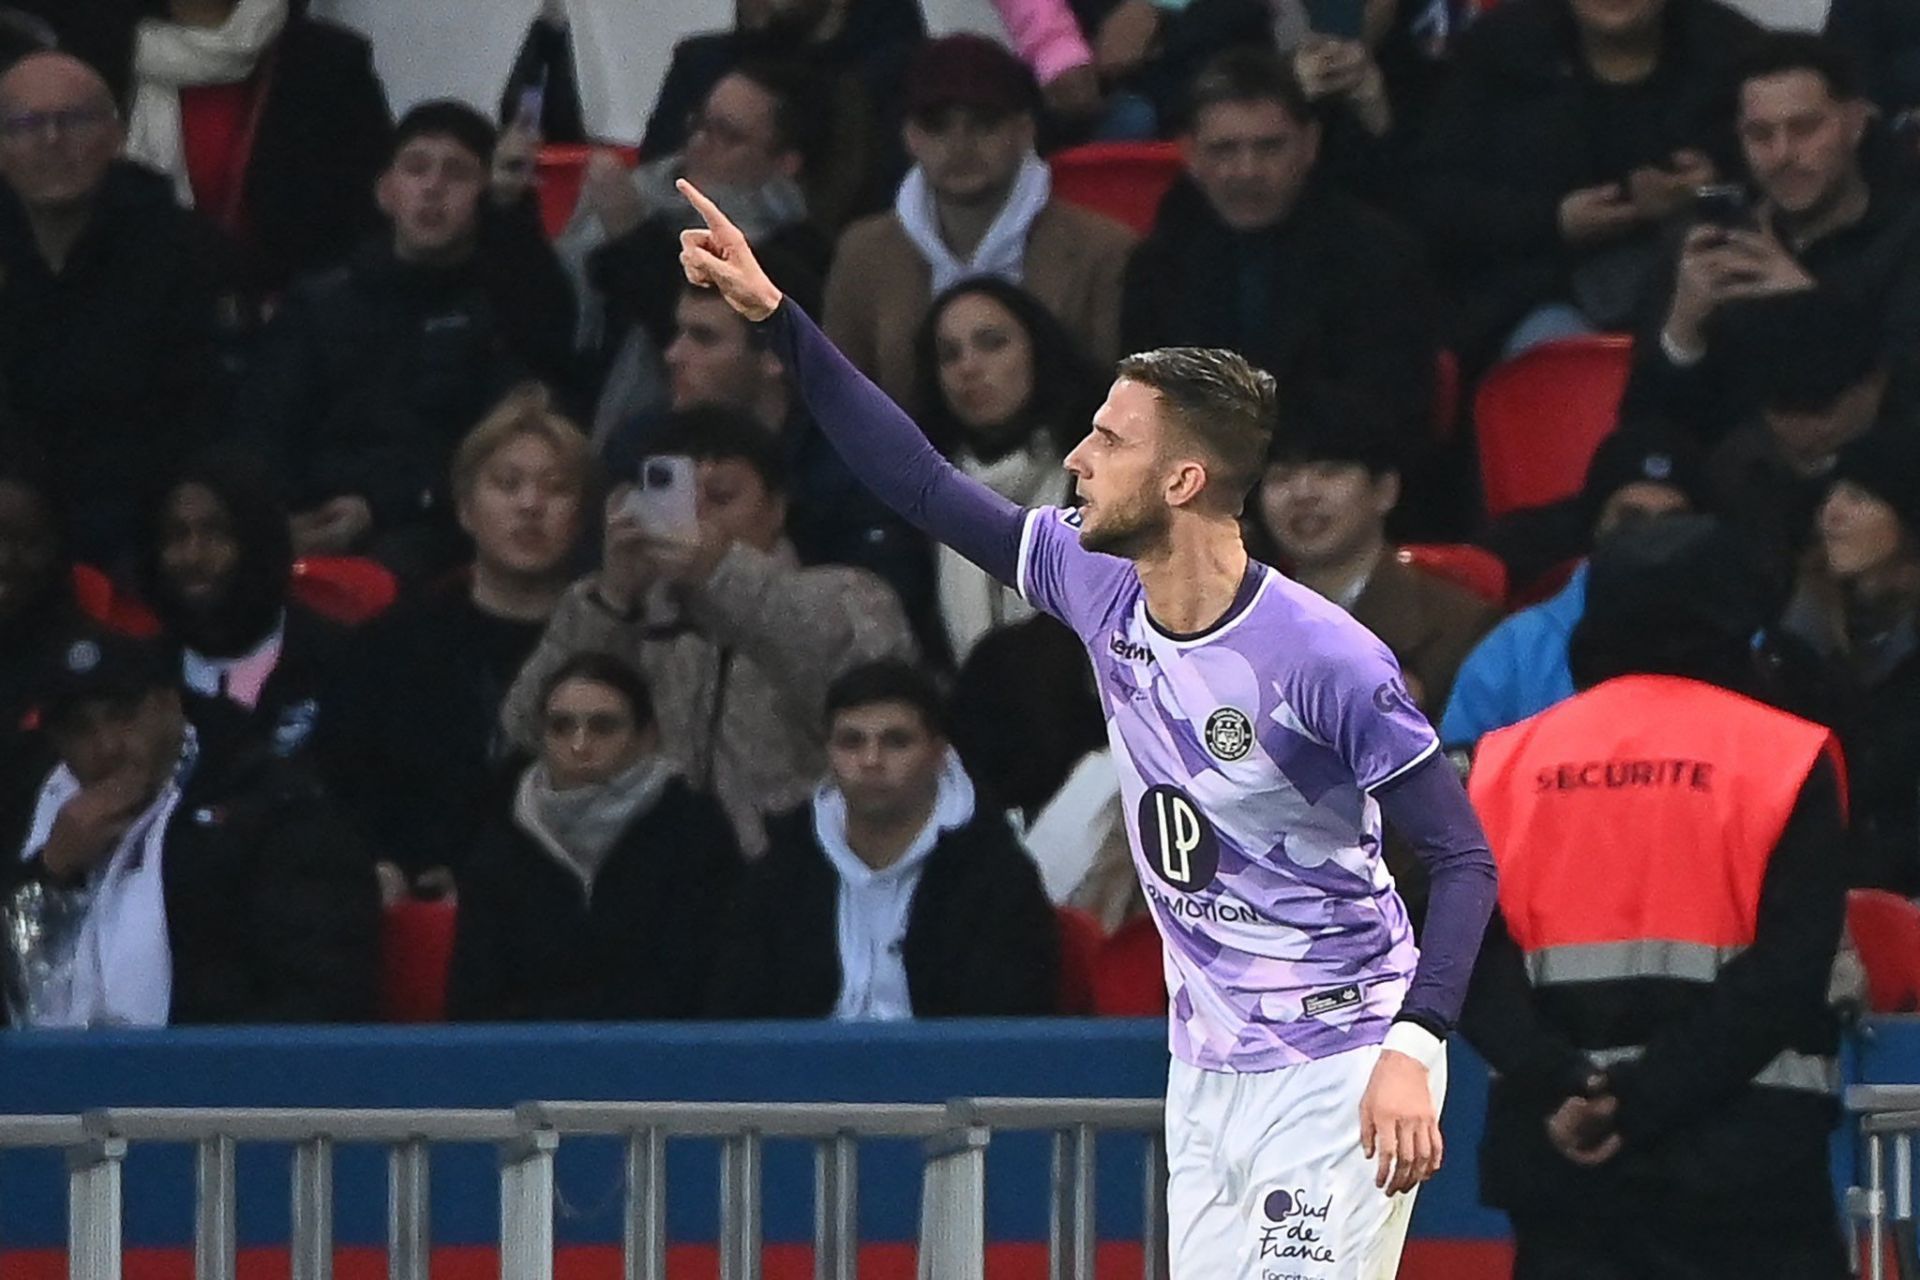 Branco van den Boomen in action for Toulouse FC (Image Credit: Twitter)